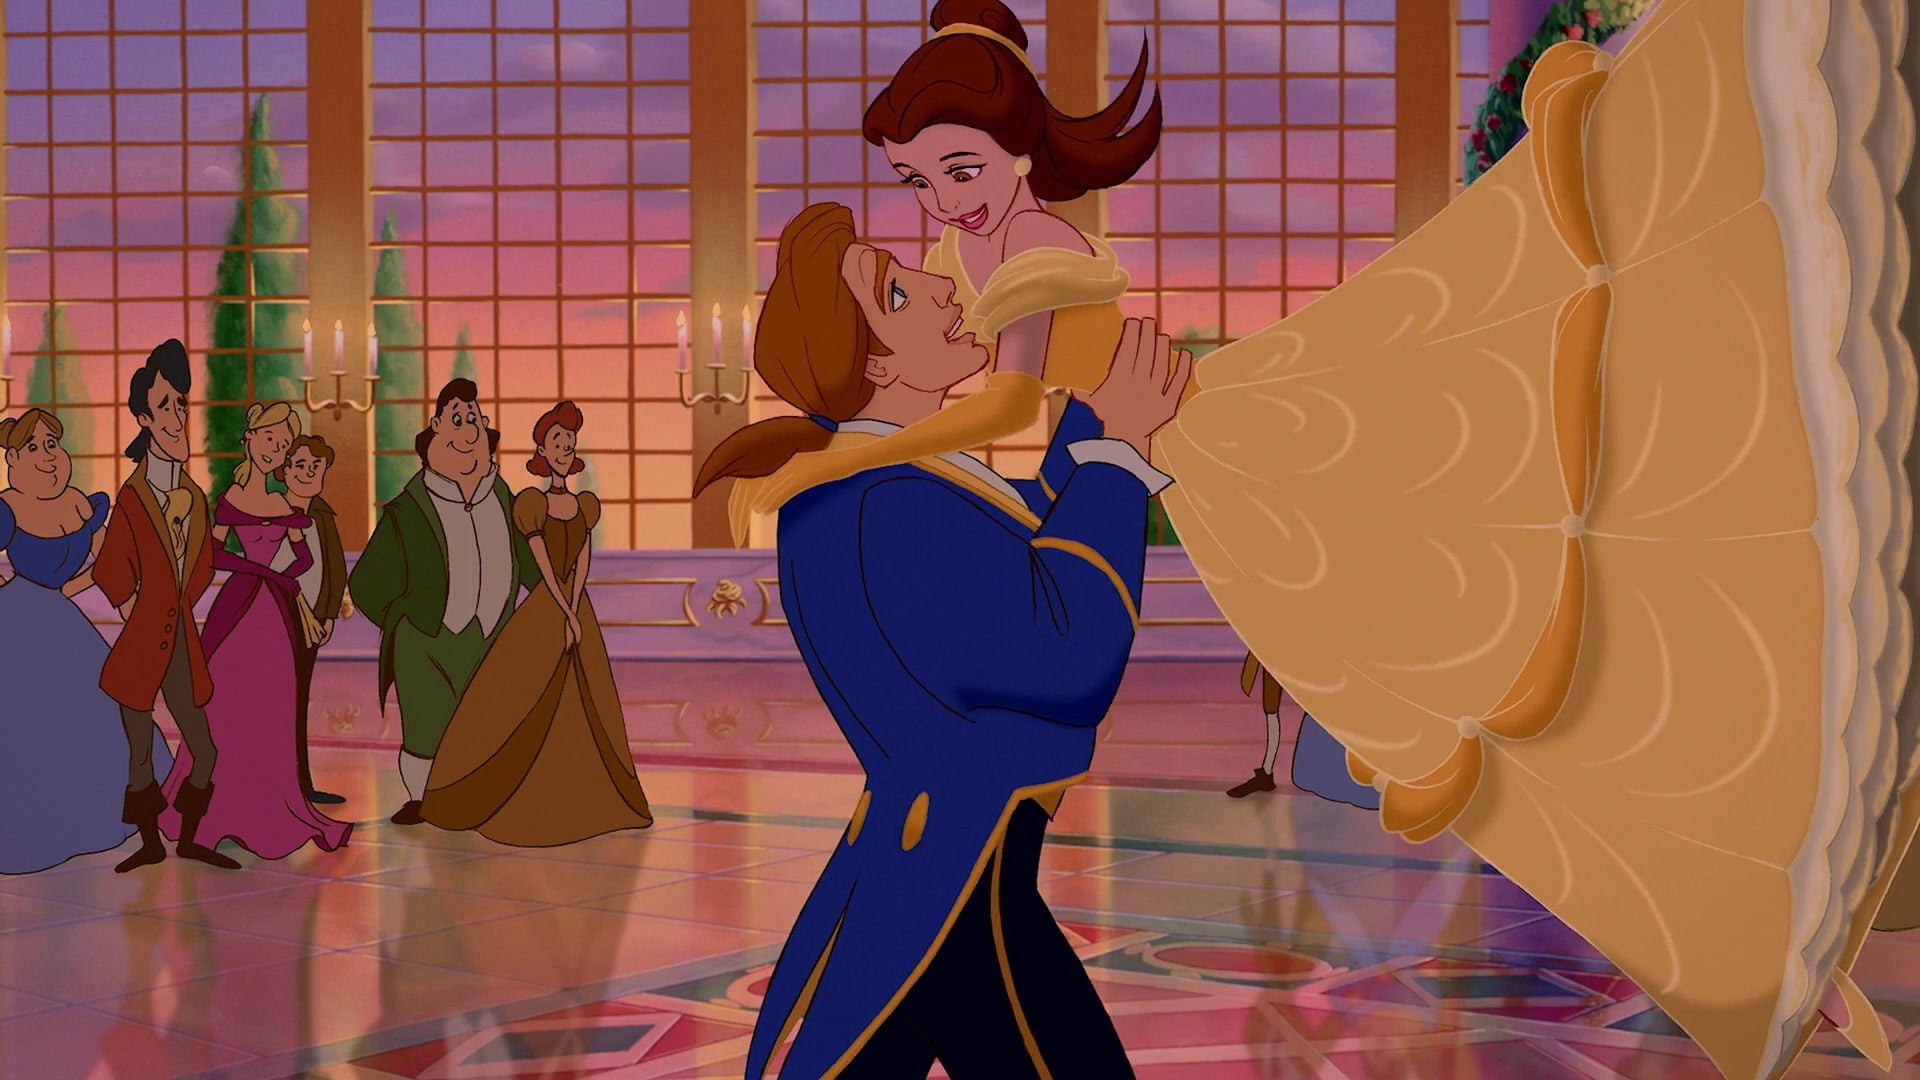 The dance between Prince Adam and Belle at the end of the movie is reused  animation from Sleeping Beauty. | 40 Disney Princess Secrets You Never Knew  Growing Up | POPSUGAR Love